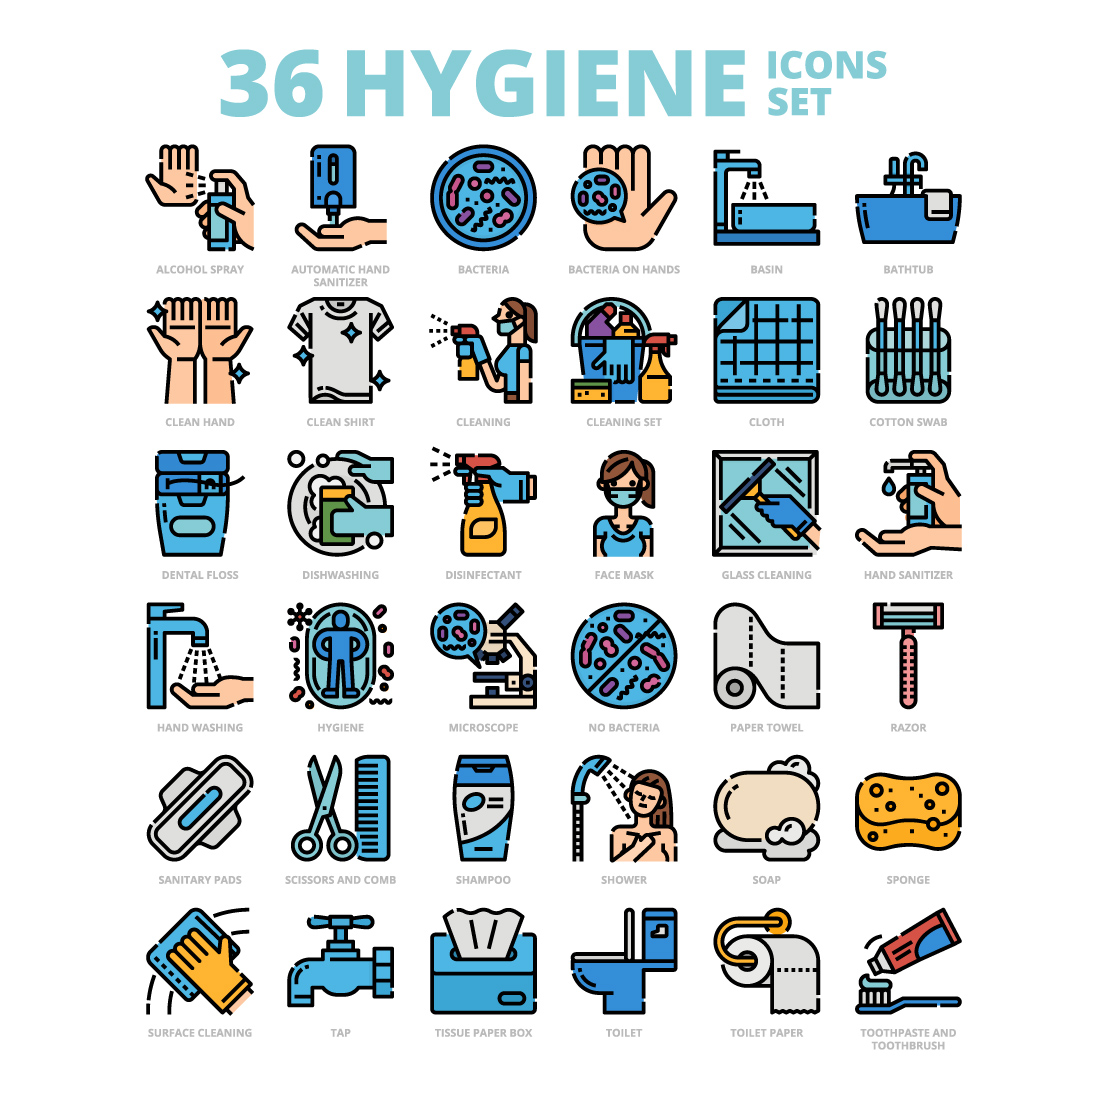 36 Hygiene Icons Set x 4 Styles cover image.